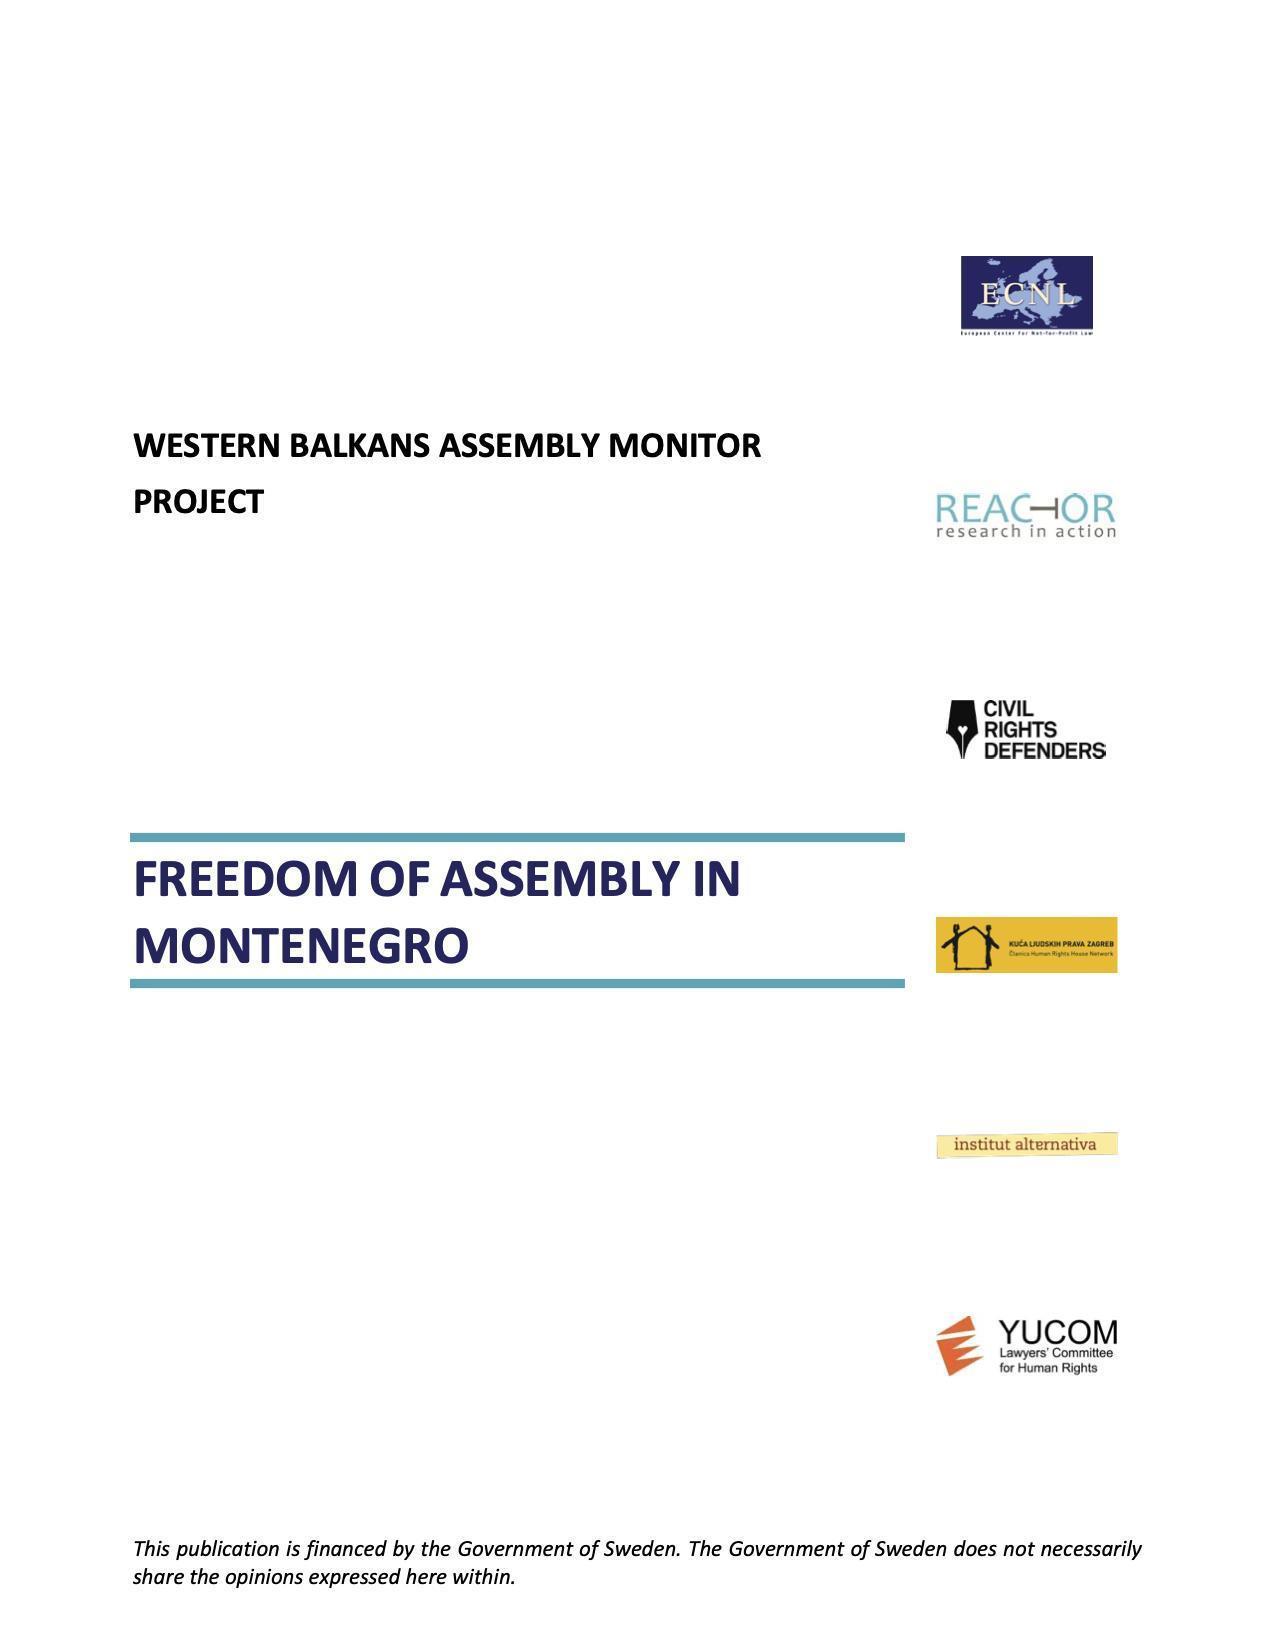 Freedom of Assembly in Montenegro